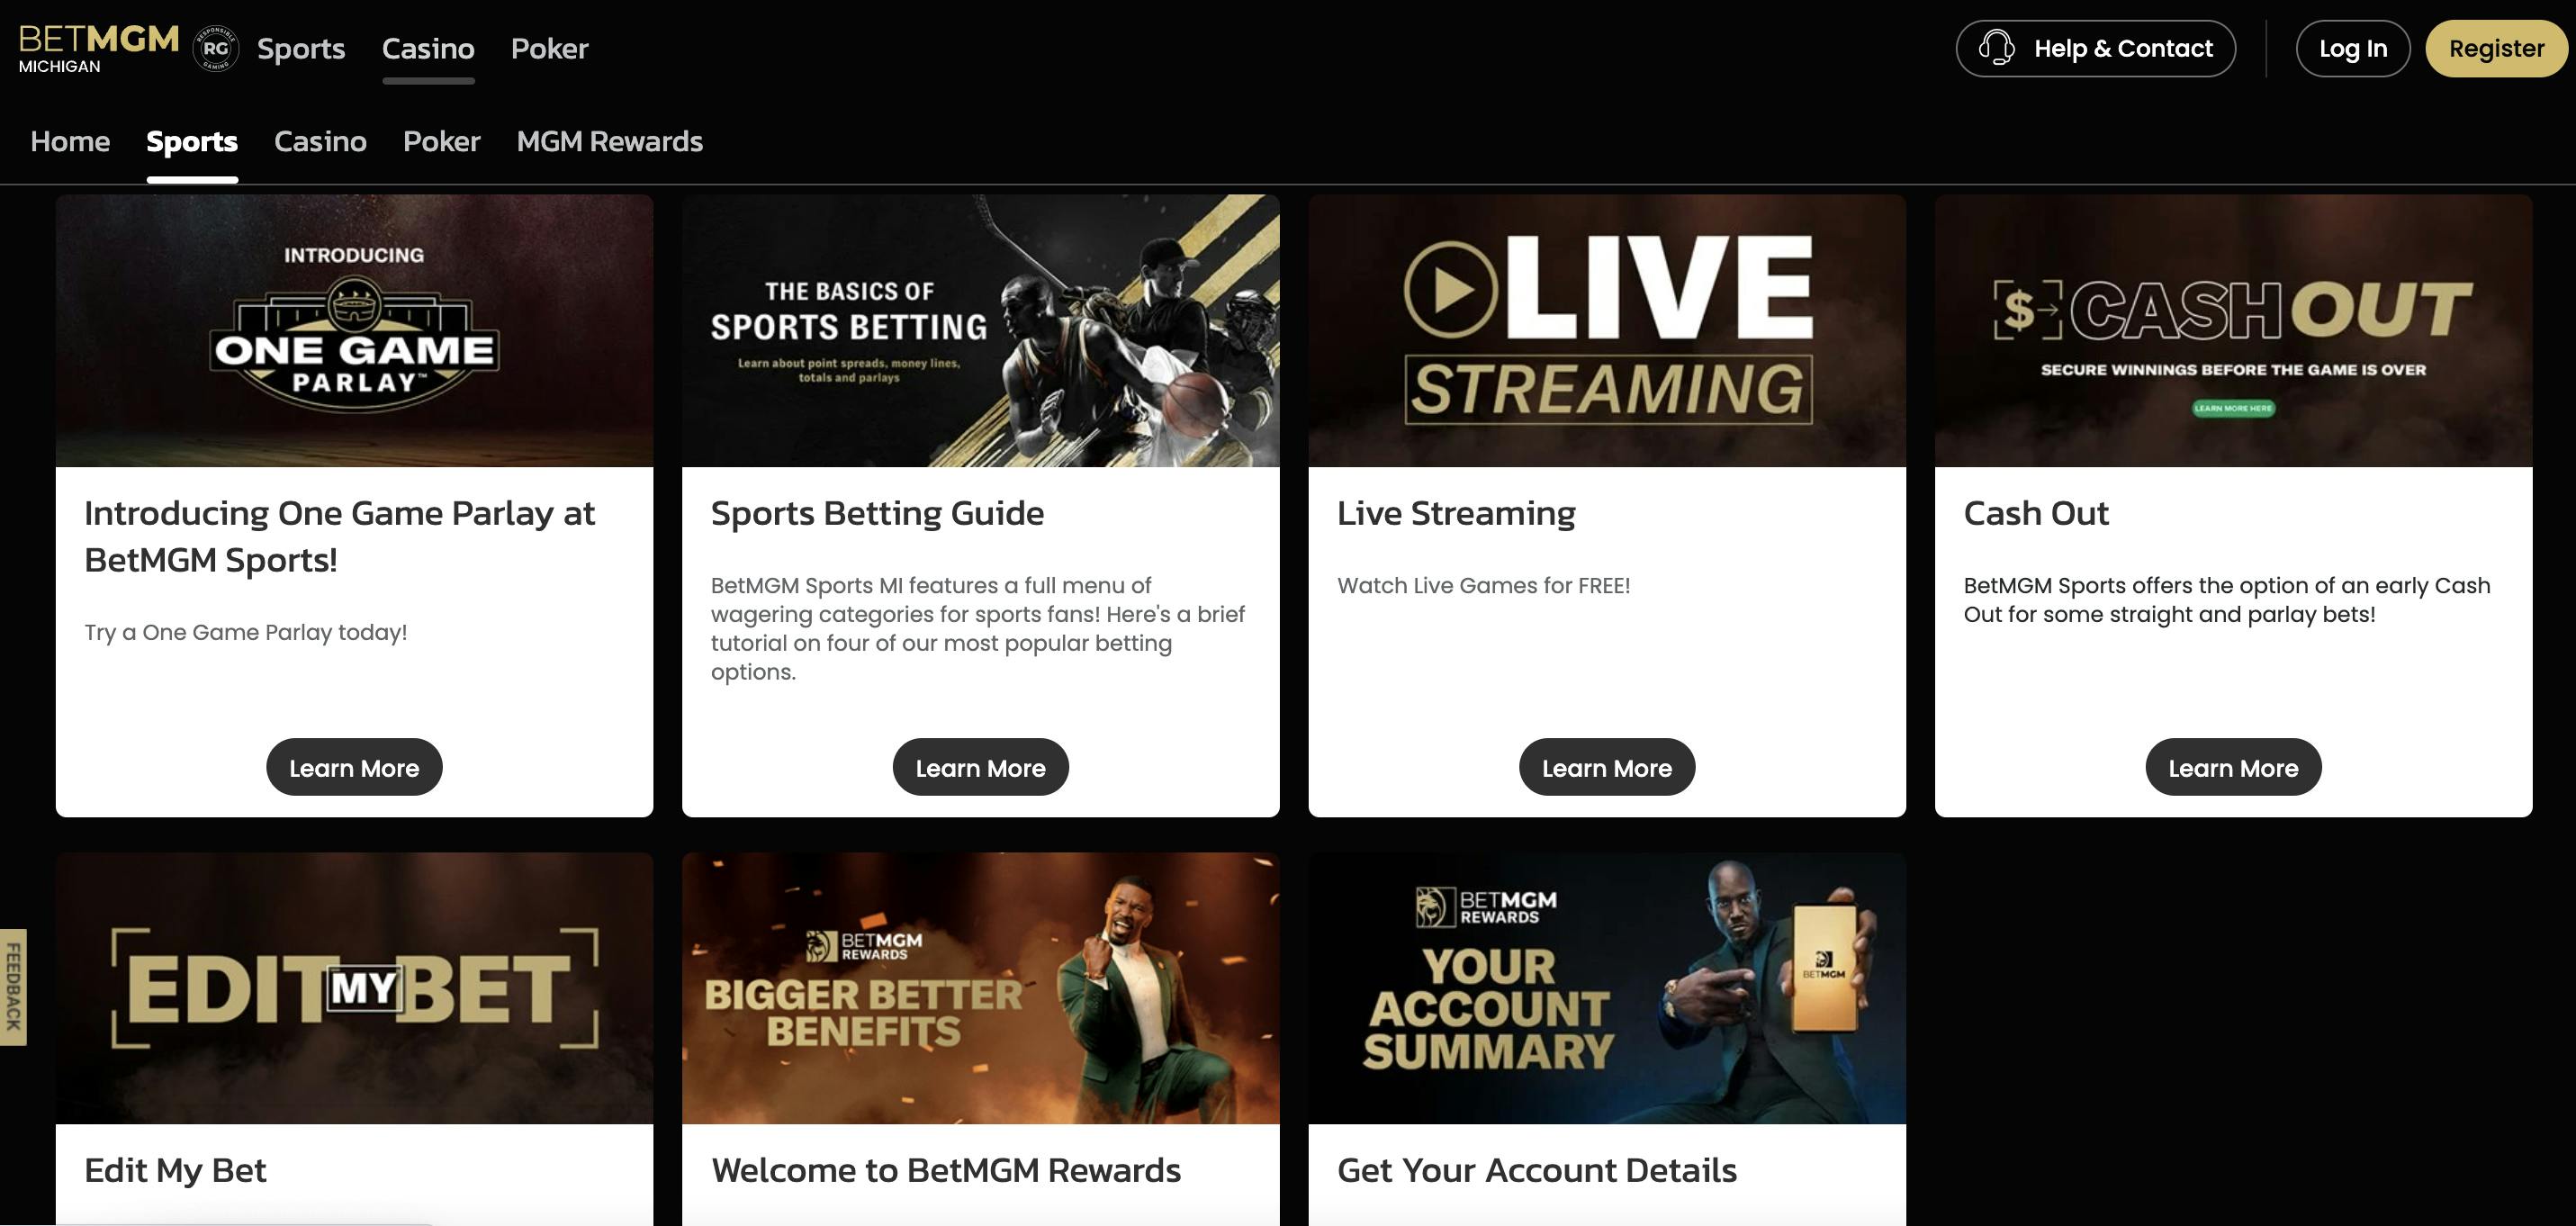 Current BetMGM Promotions highlighted